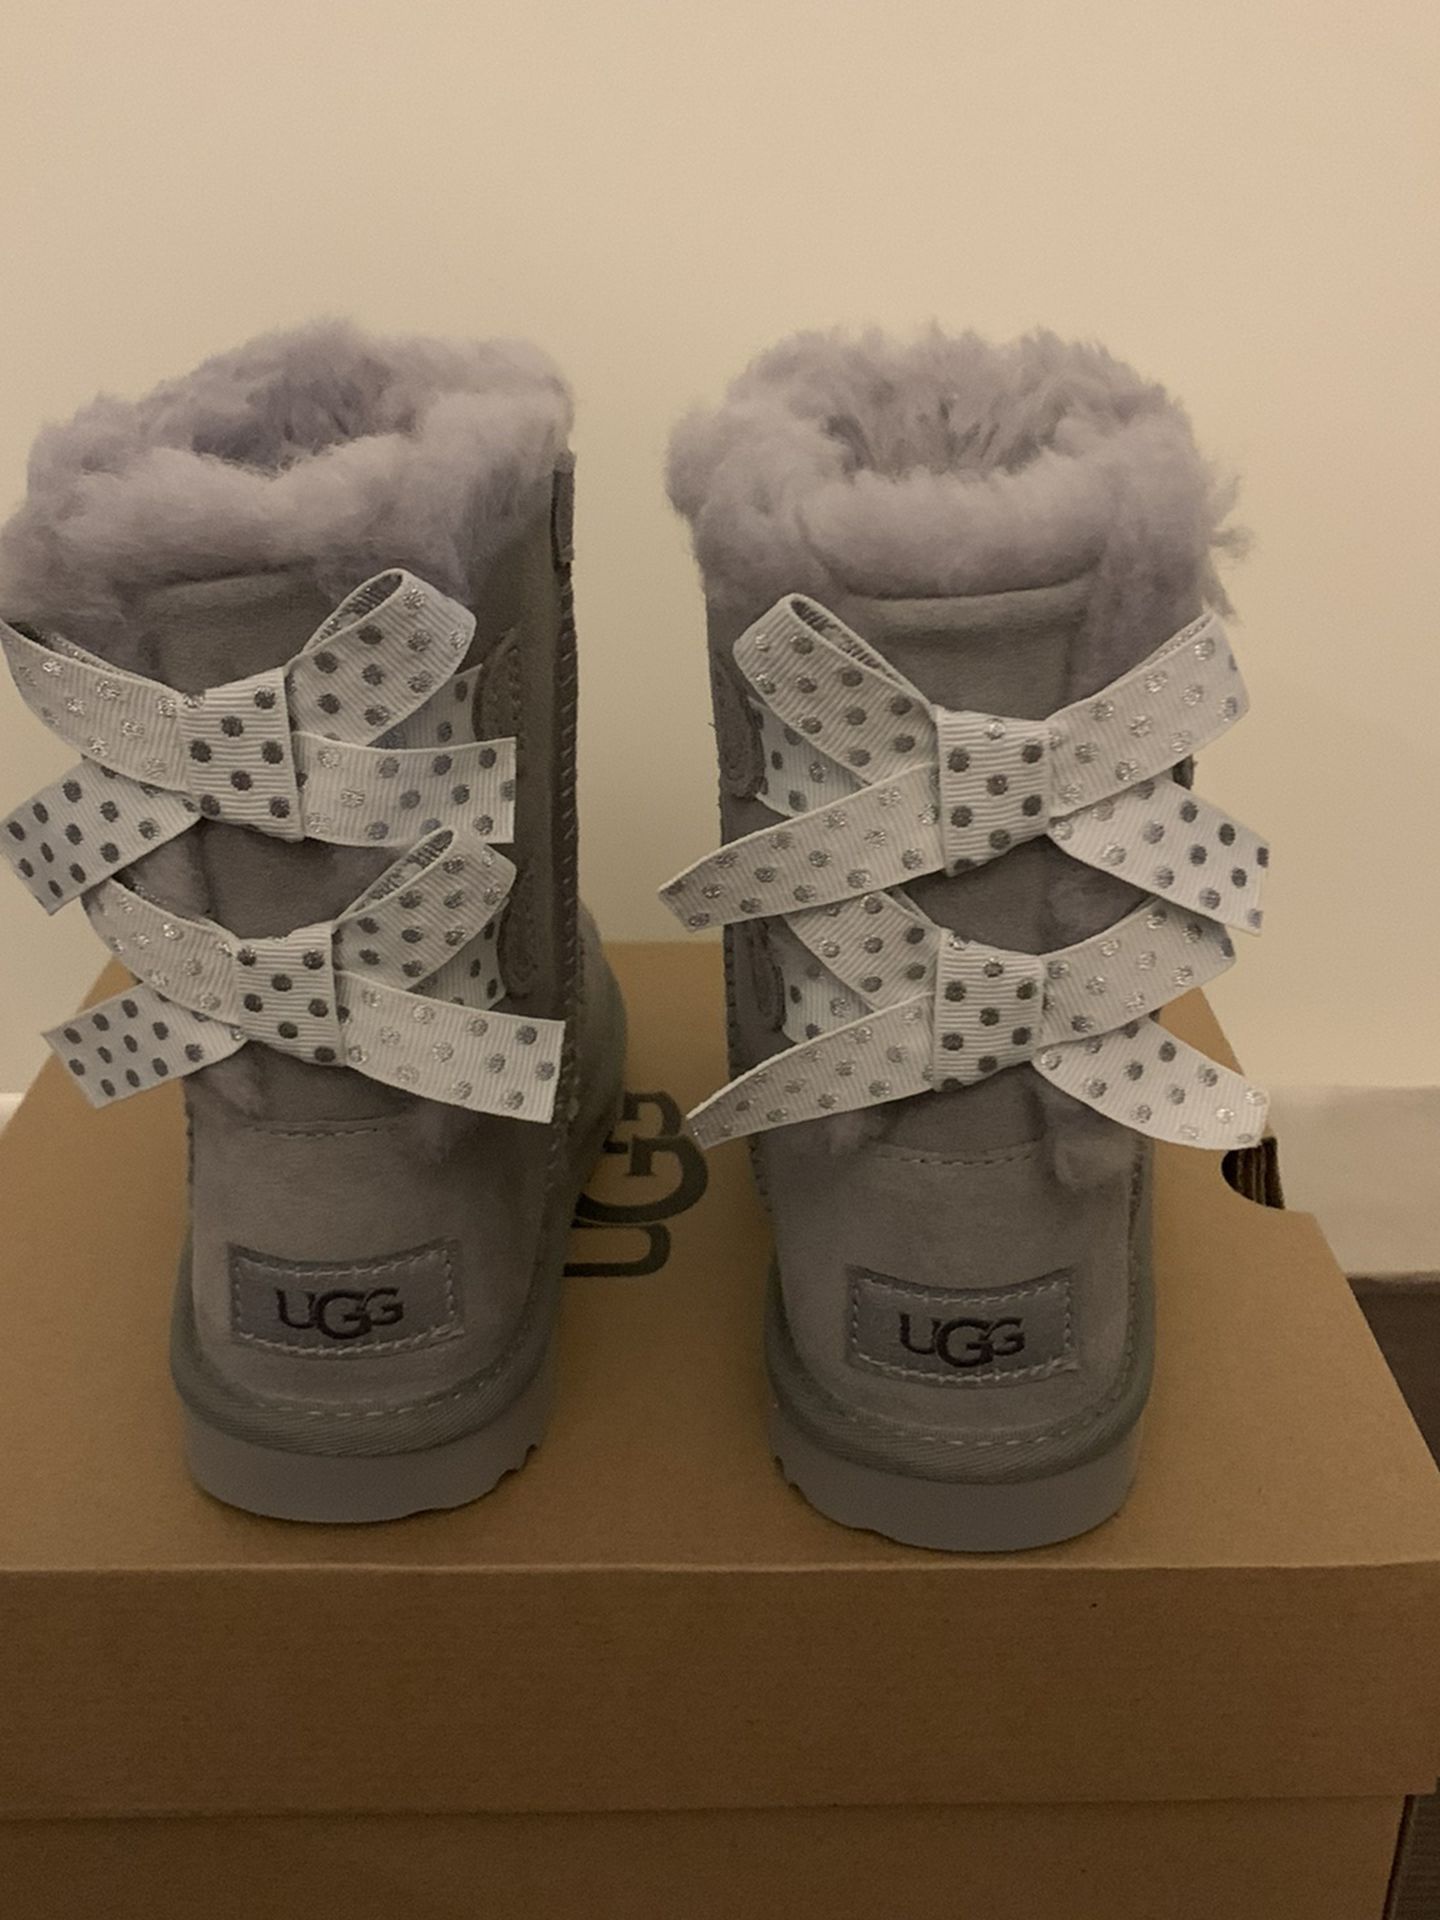 100% Authentic Brand New in Box UGG Bailey Bow Polka Boots / Color: Grey / Toddler size 7 and 11